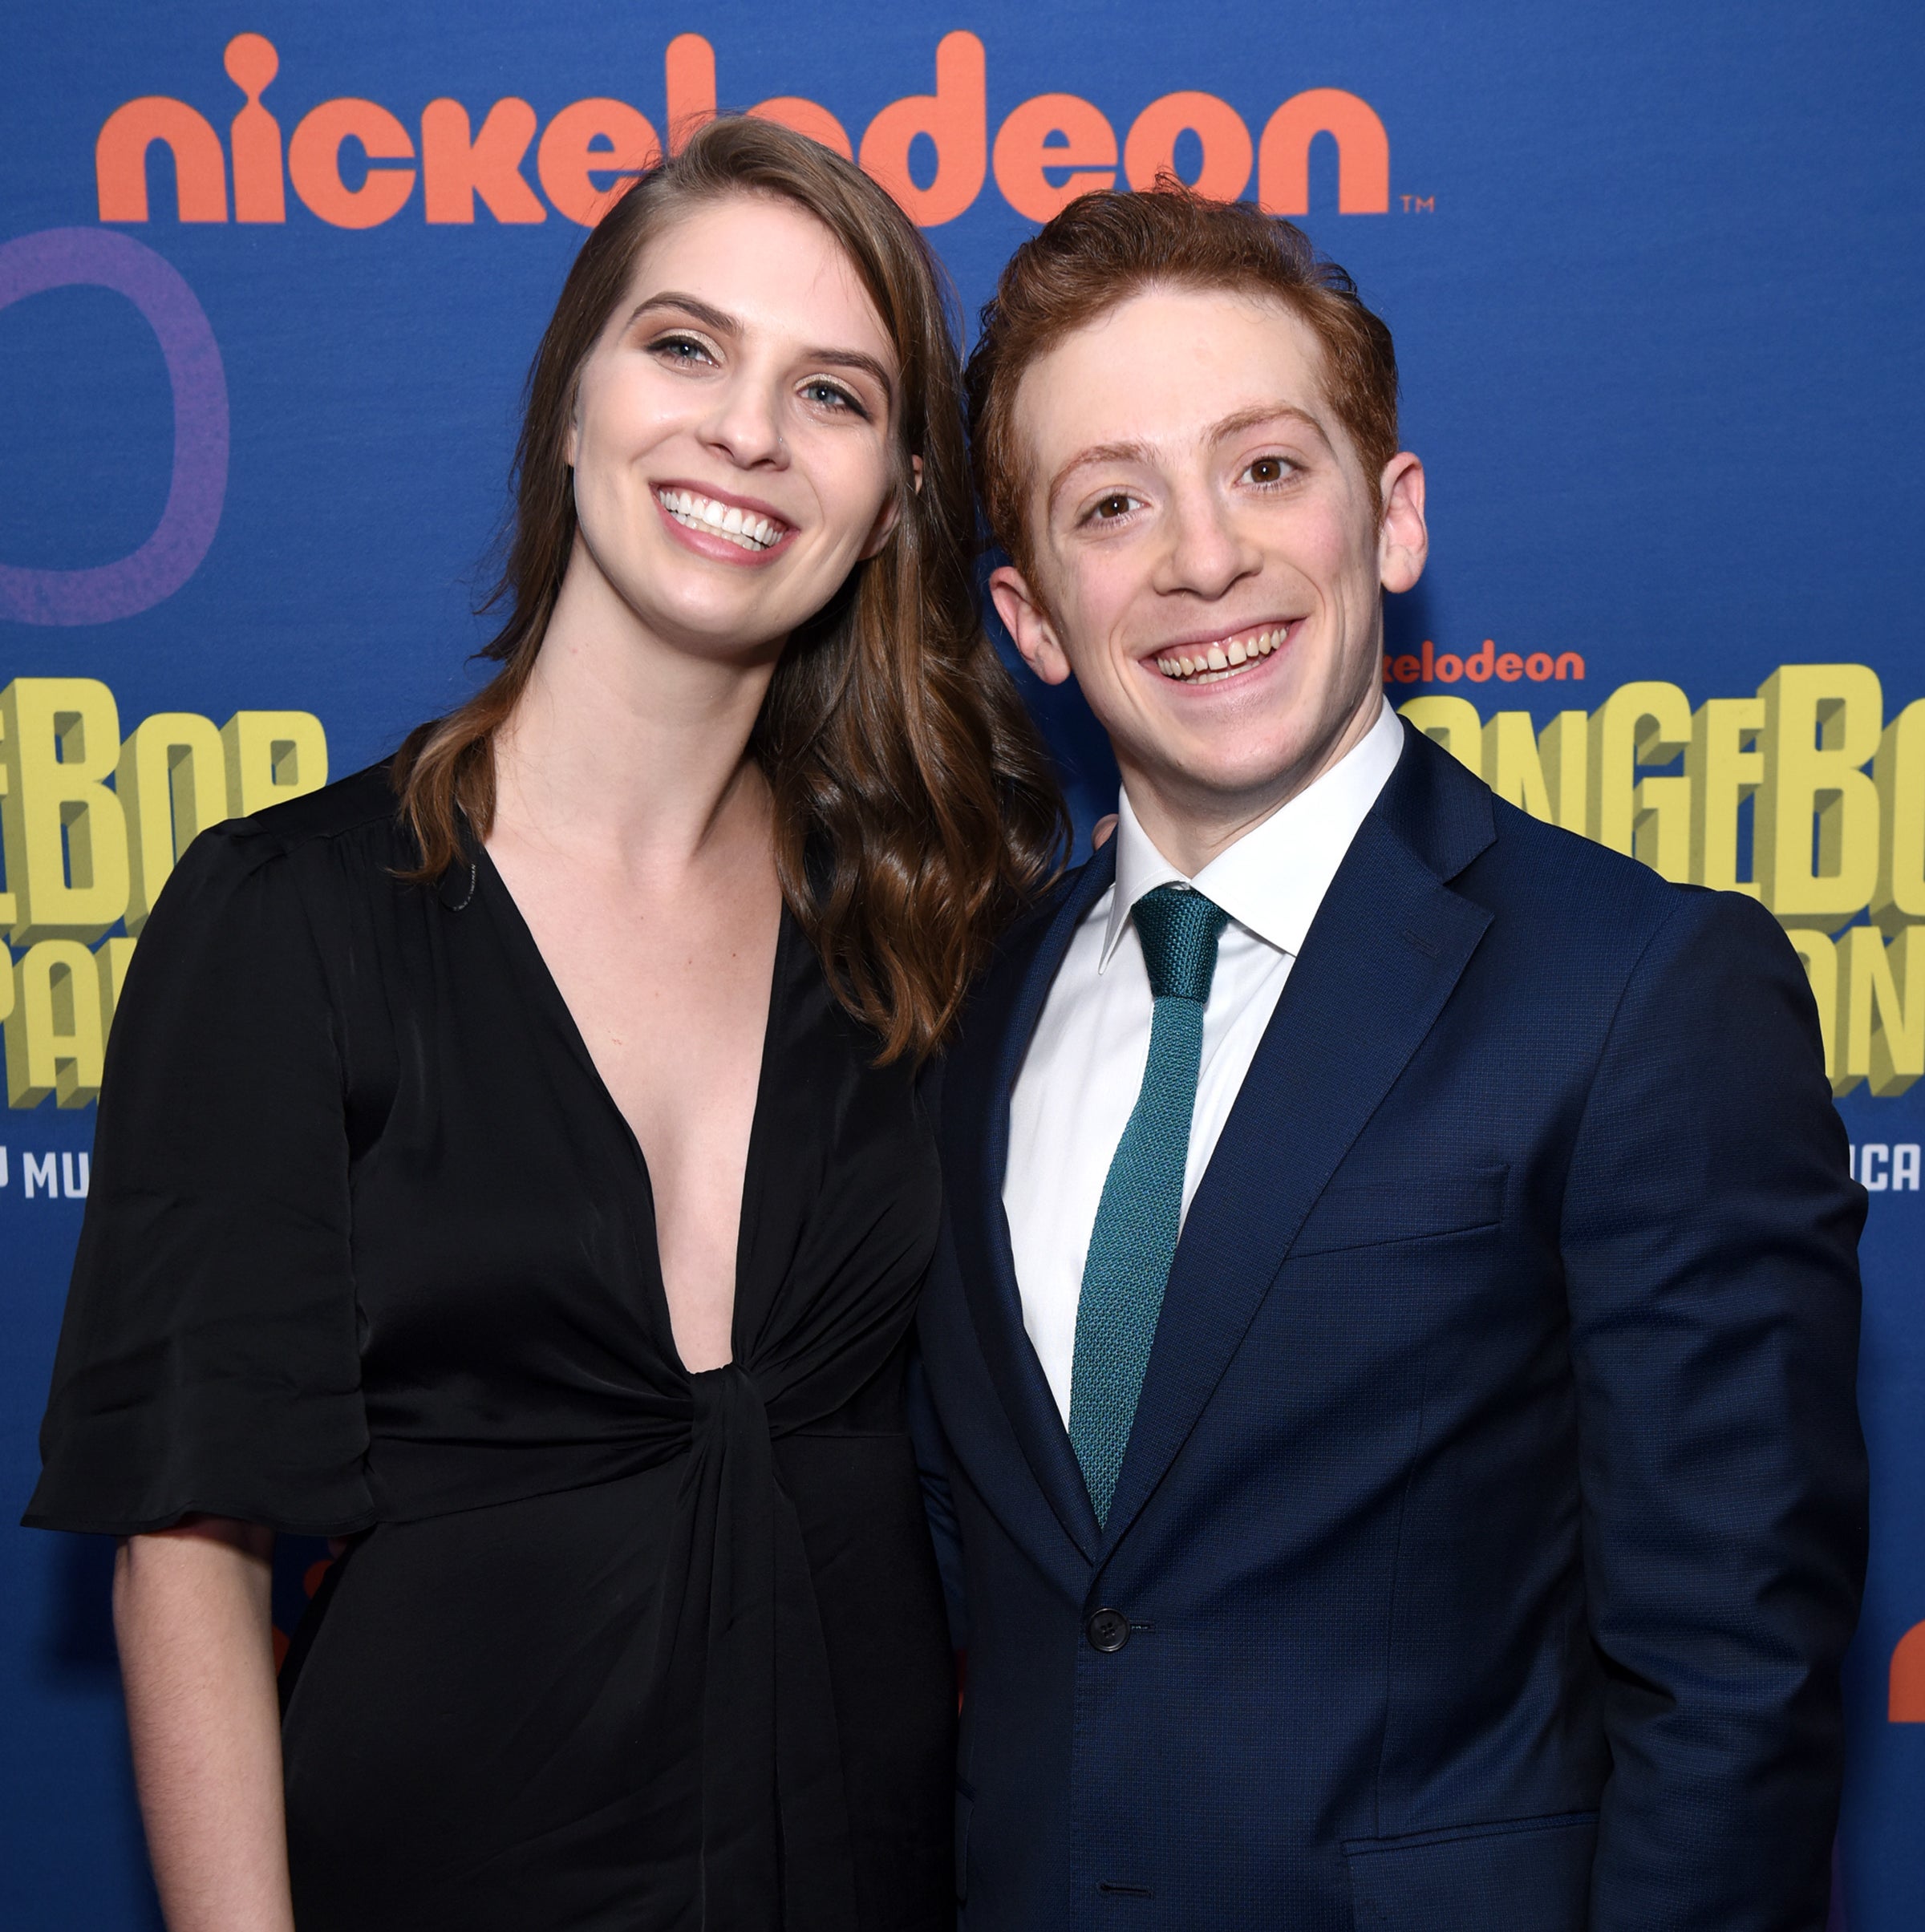 Lilly and Nathan smiling at a public event